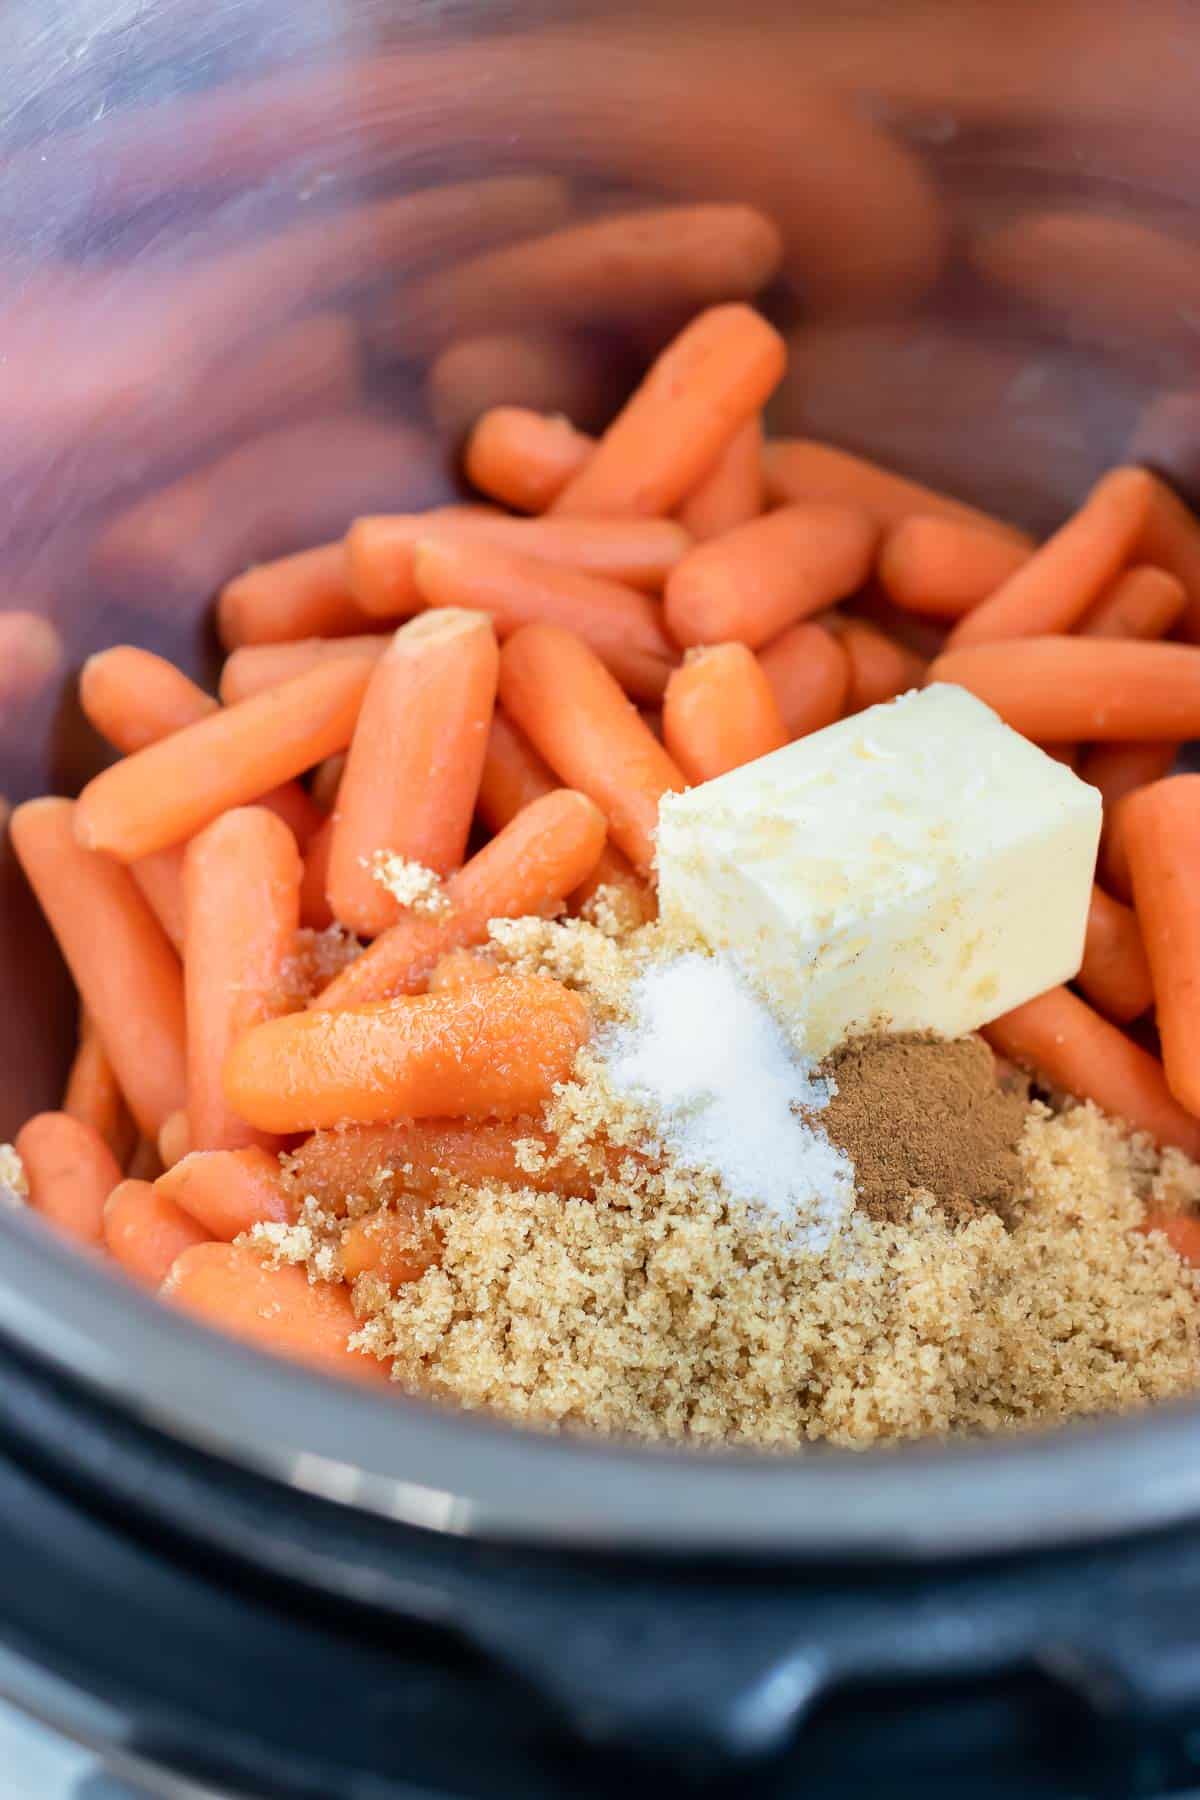 Butter, sugar, and seasonings are placed on the baby carrots in the instant pot.